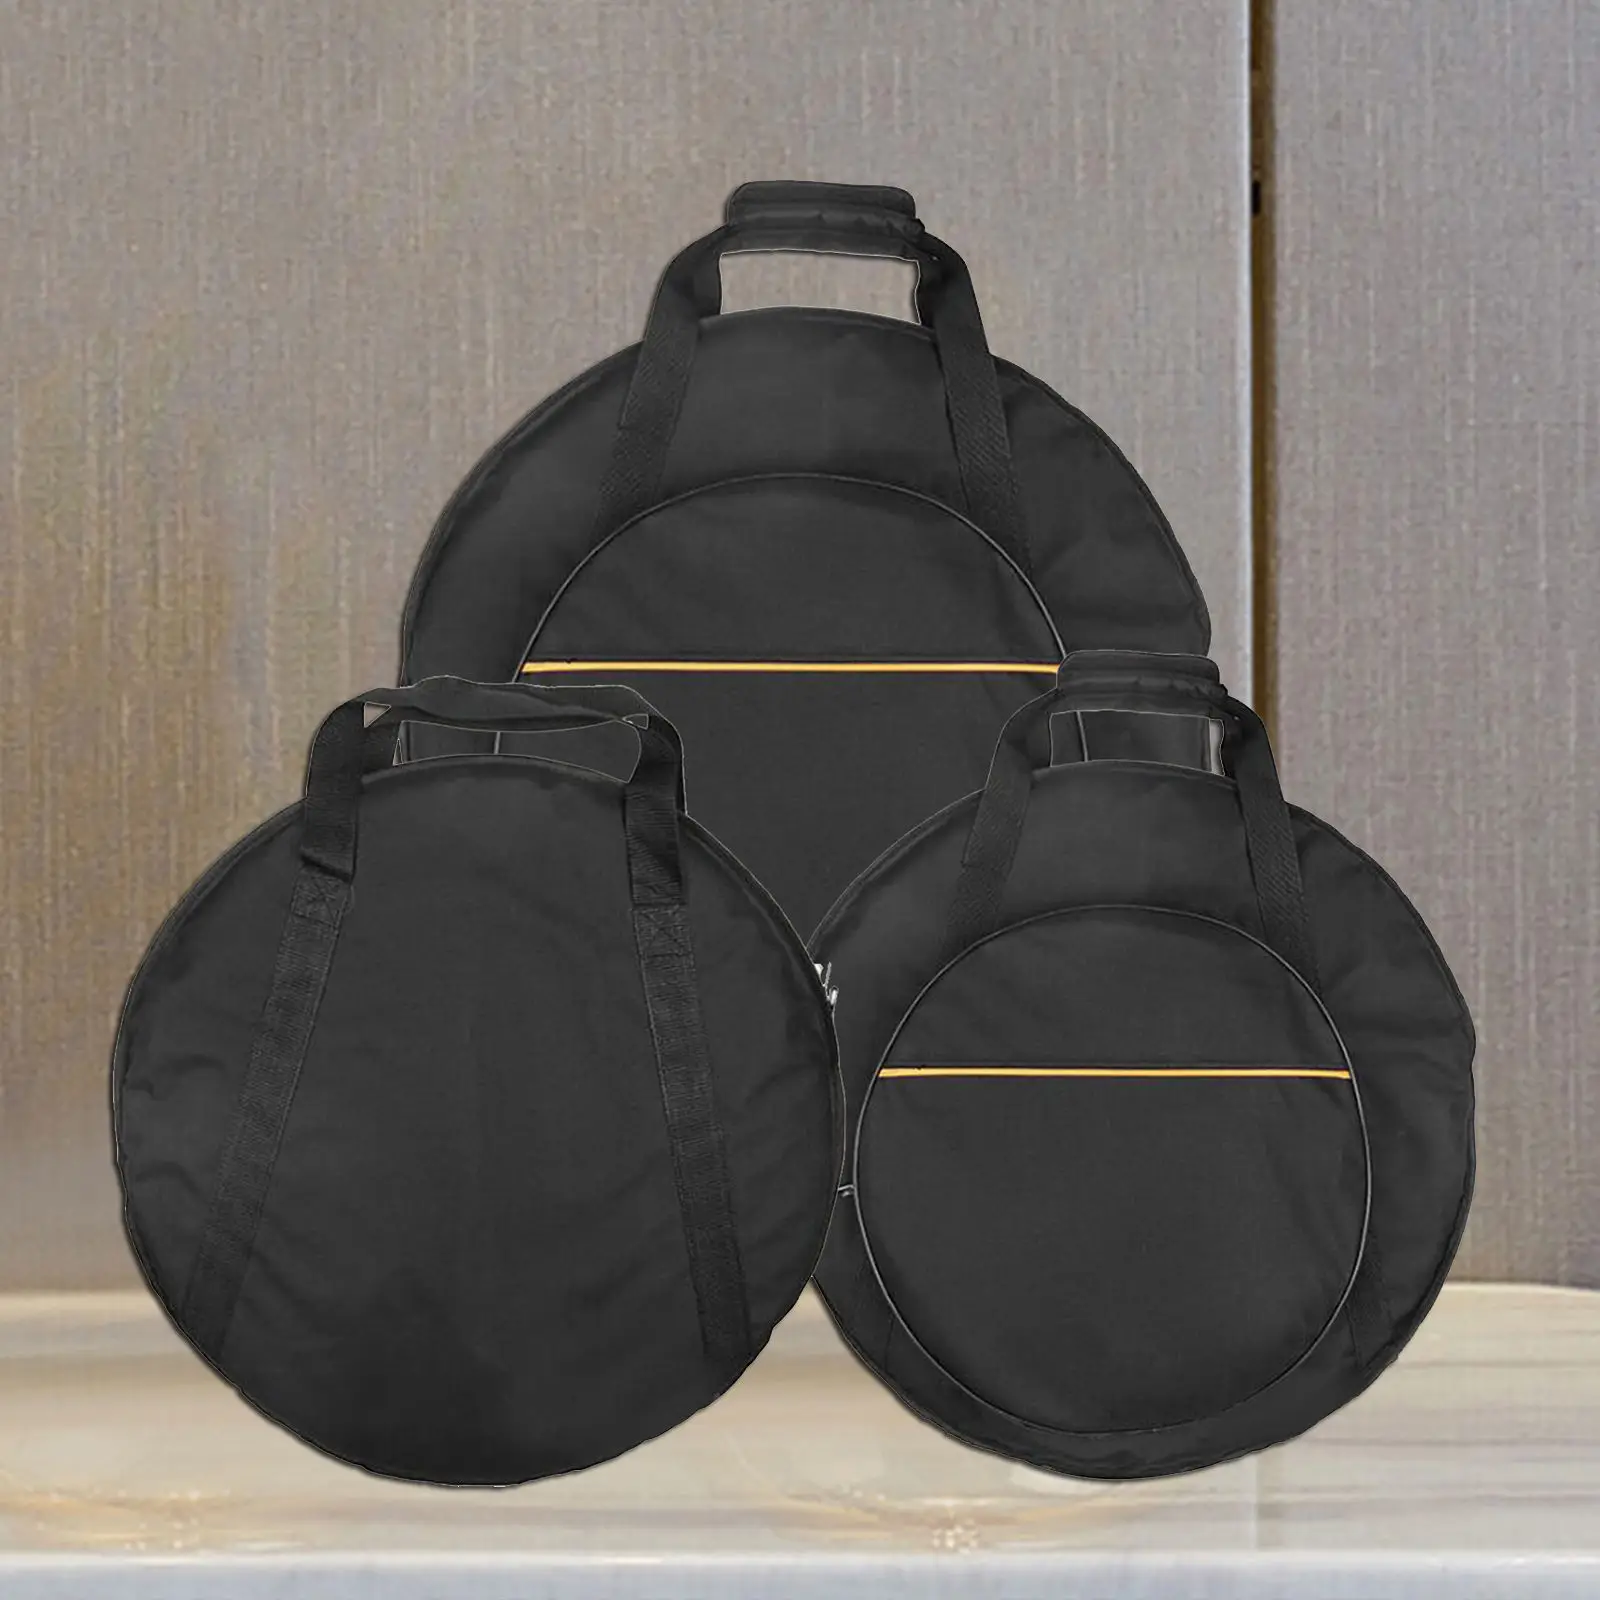 1PC Oxford Cloth Cymbal Storage Bag Cymbal Carrying Case with Carry Handles